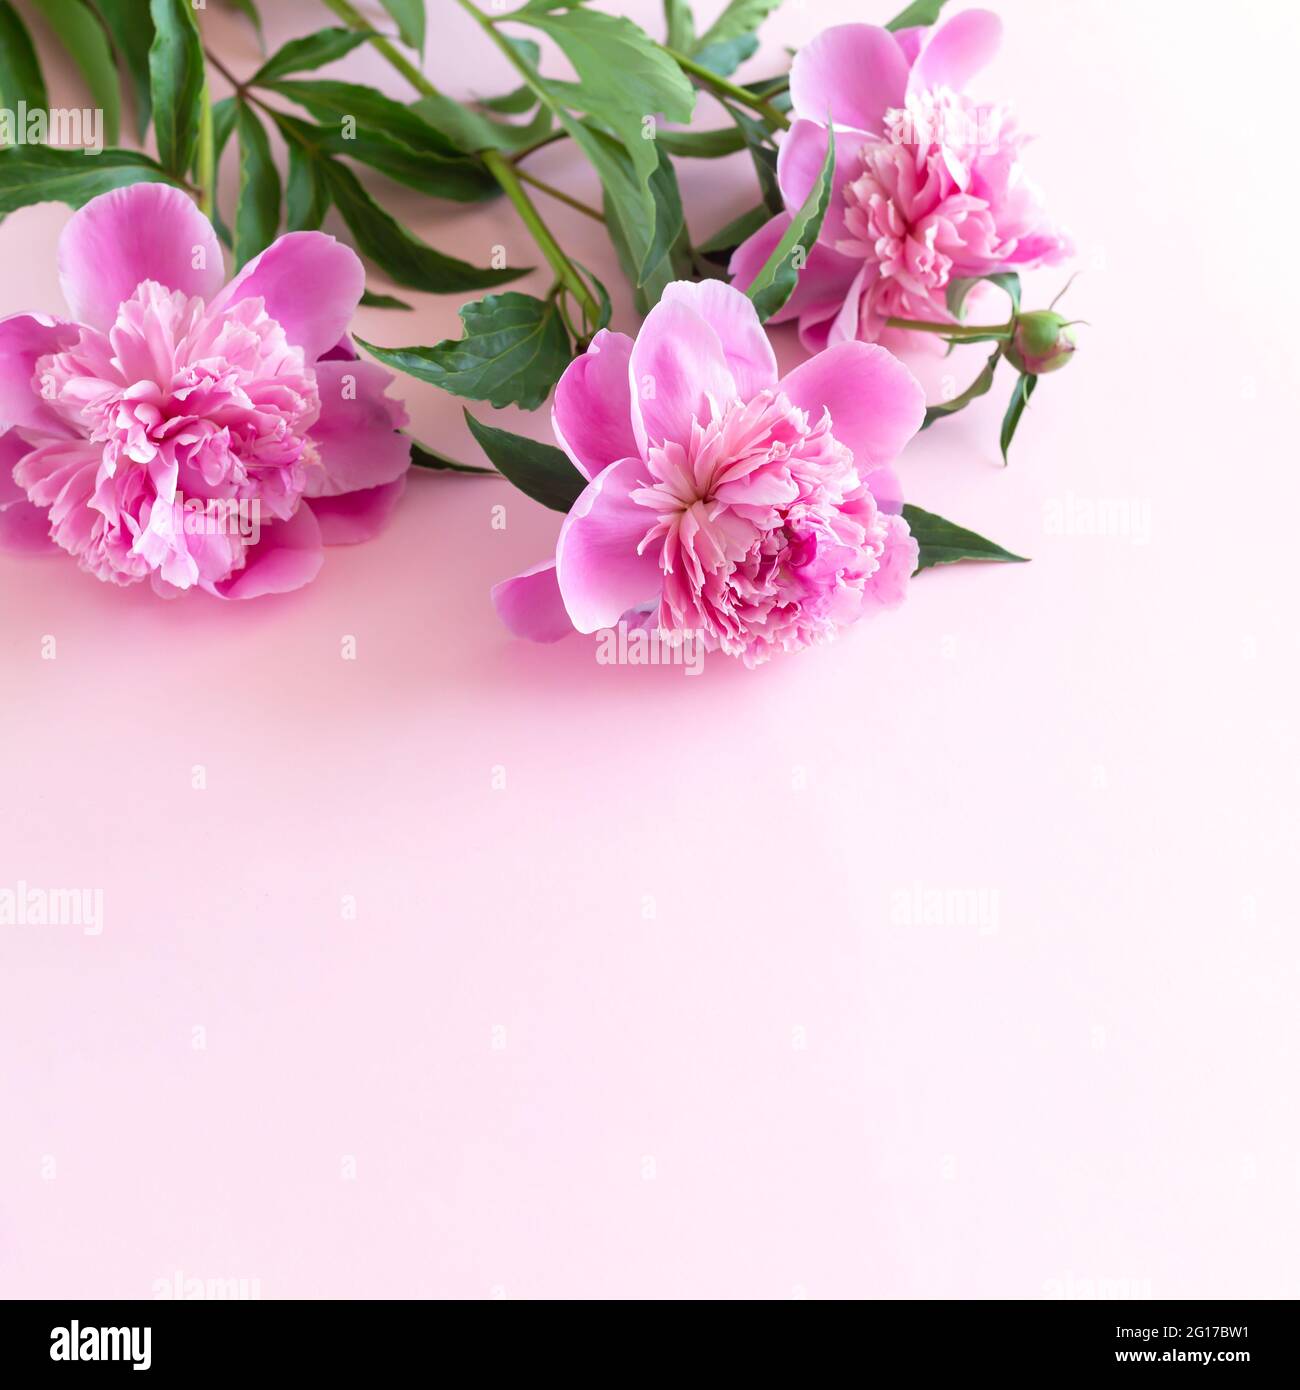 Bouquet of beautiful pink peony flowers on light pink table with copy space Stock Photo